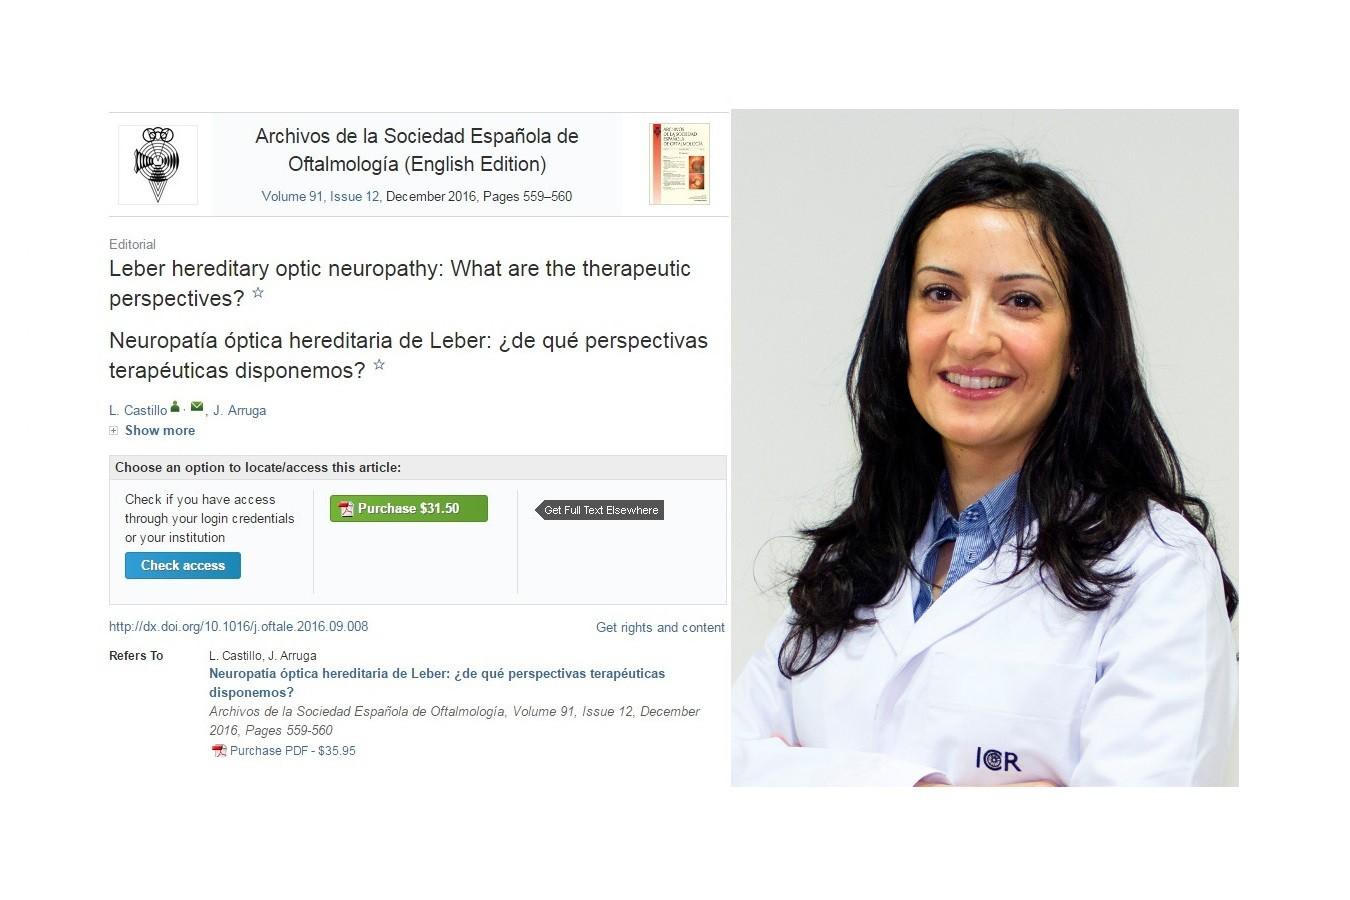 Dr. Castillo publishes an editorial on LHON therapeutic perspectives in the journal of the Spanish Society of Ophthalmology